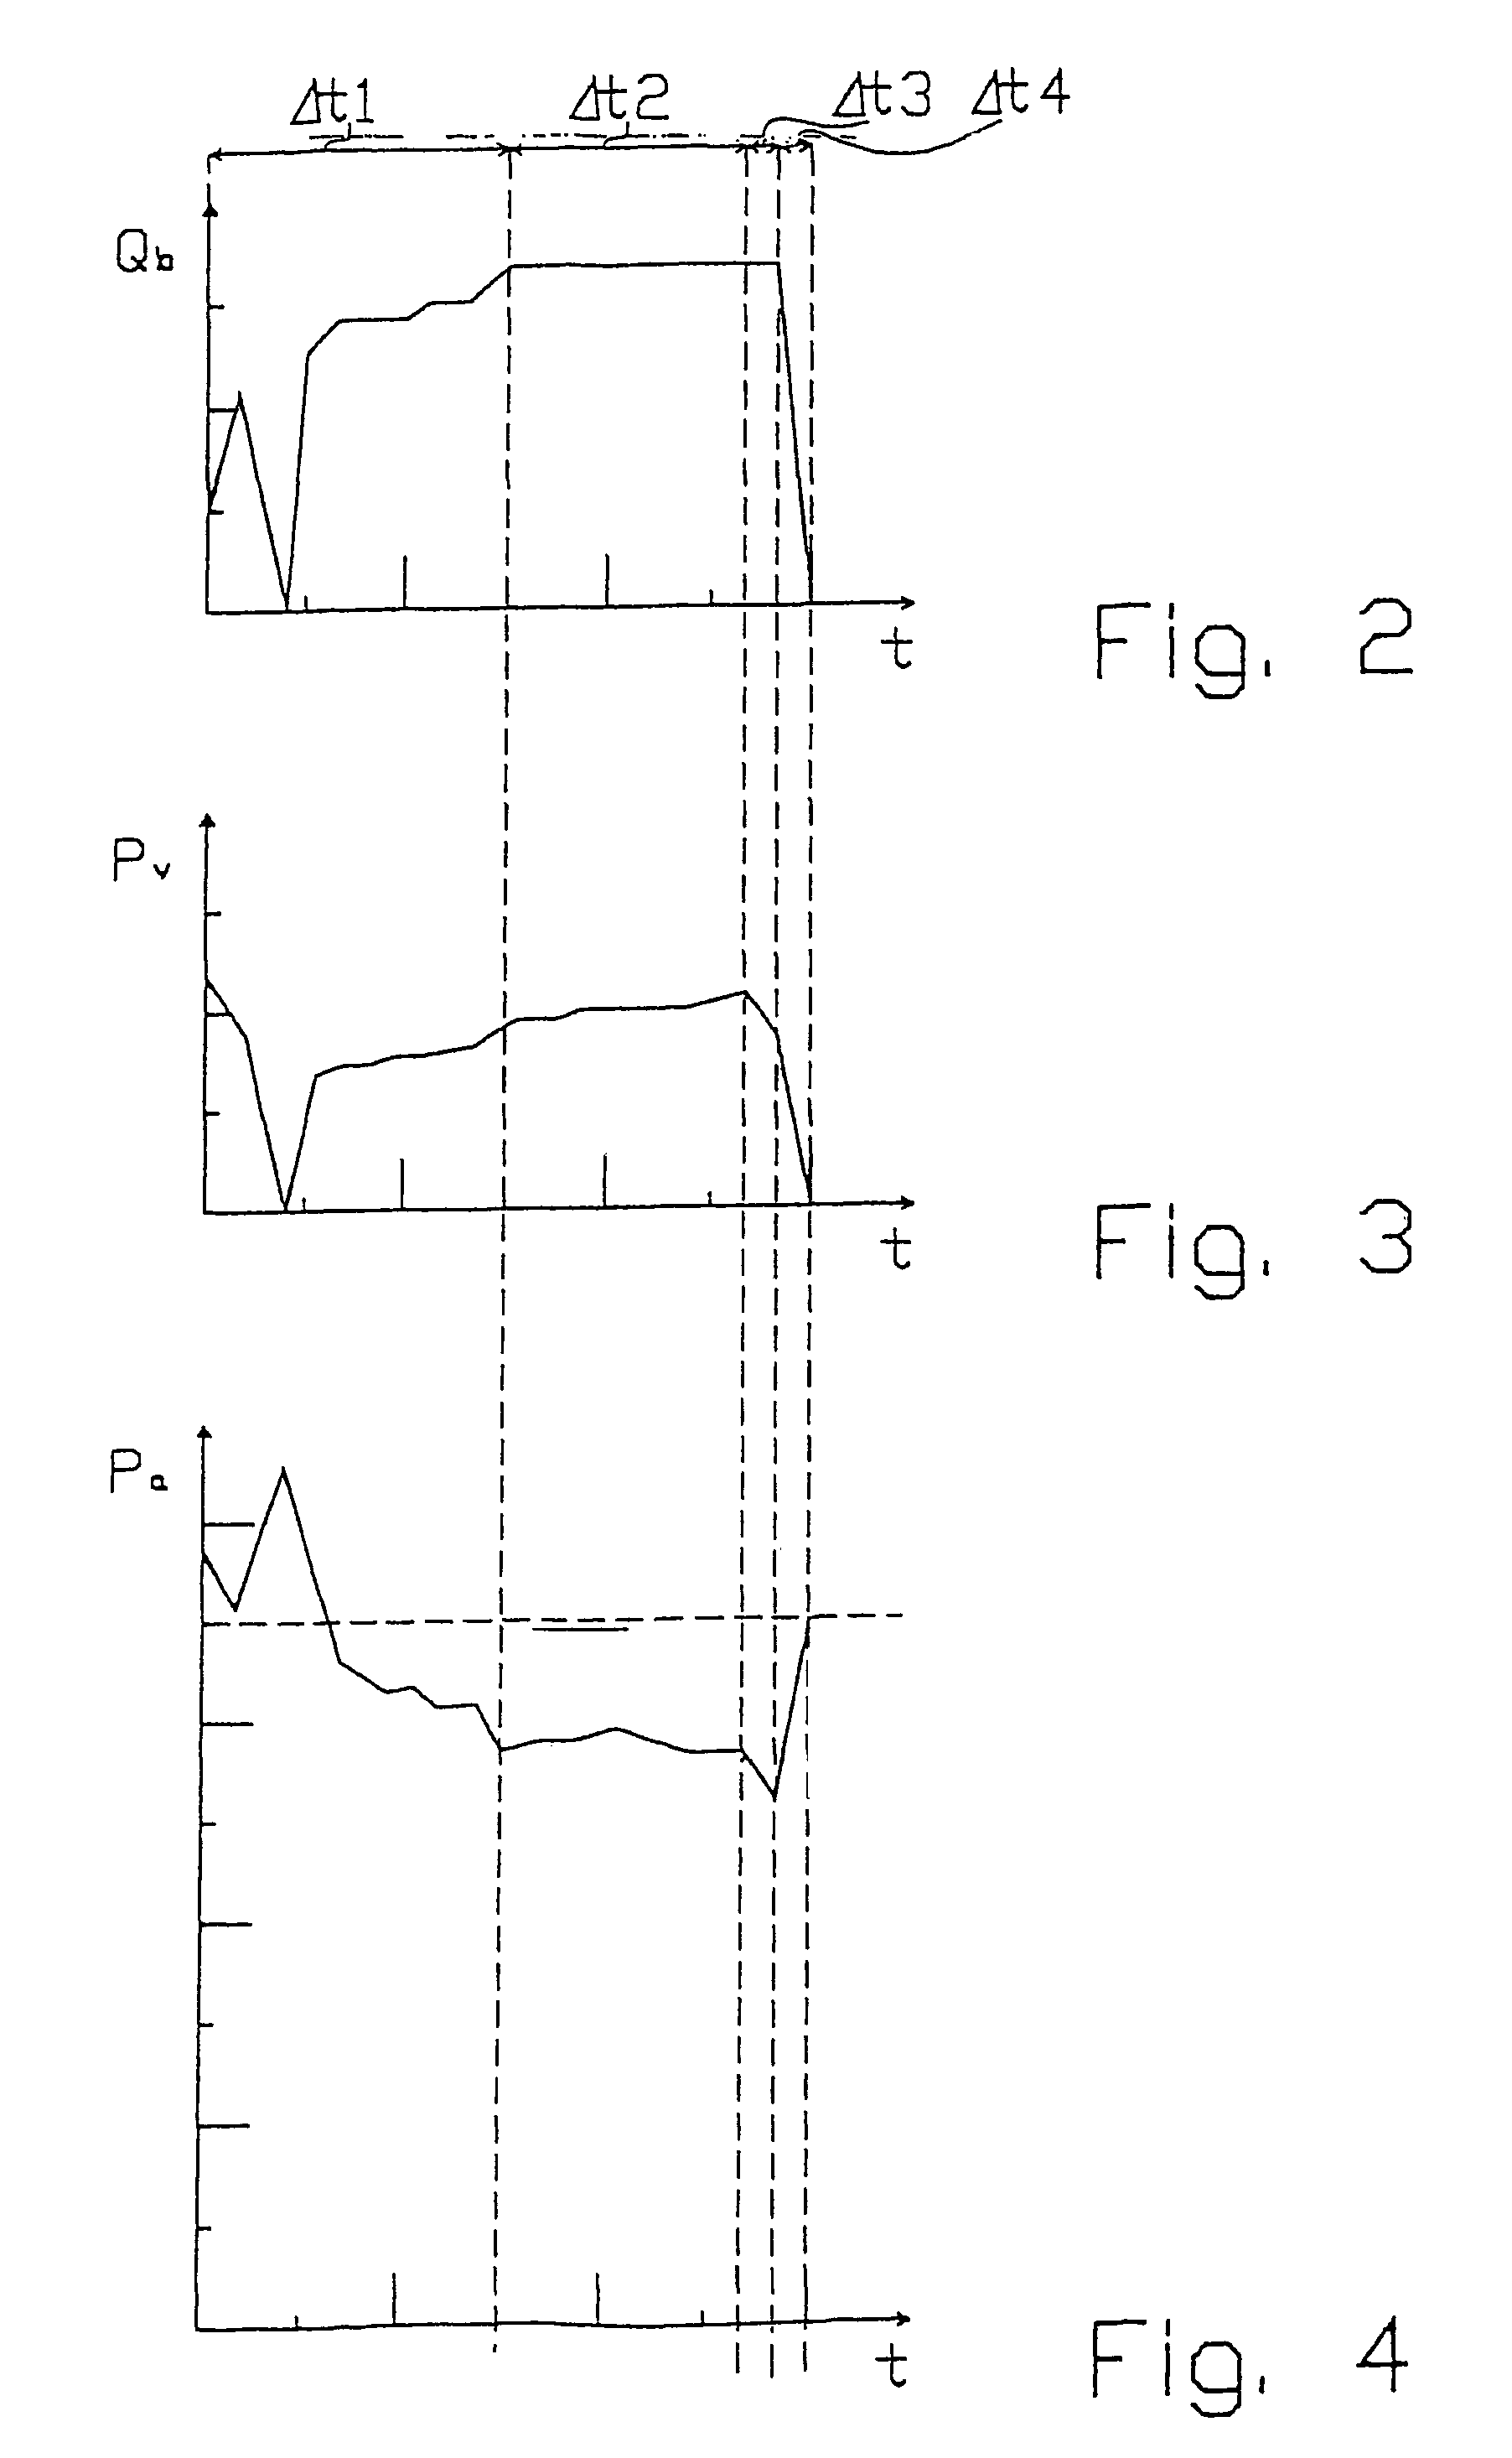 Method and device for detecting the detachment of the venous needle from a patient during dialysis